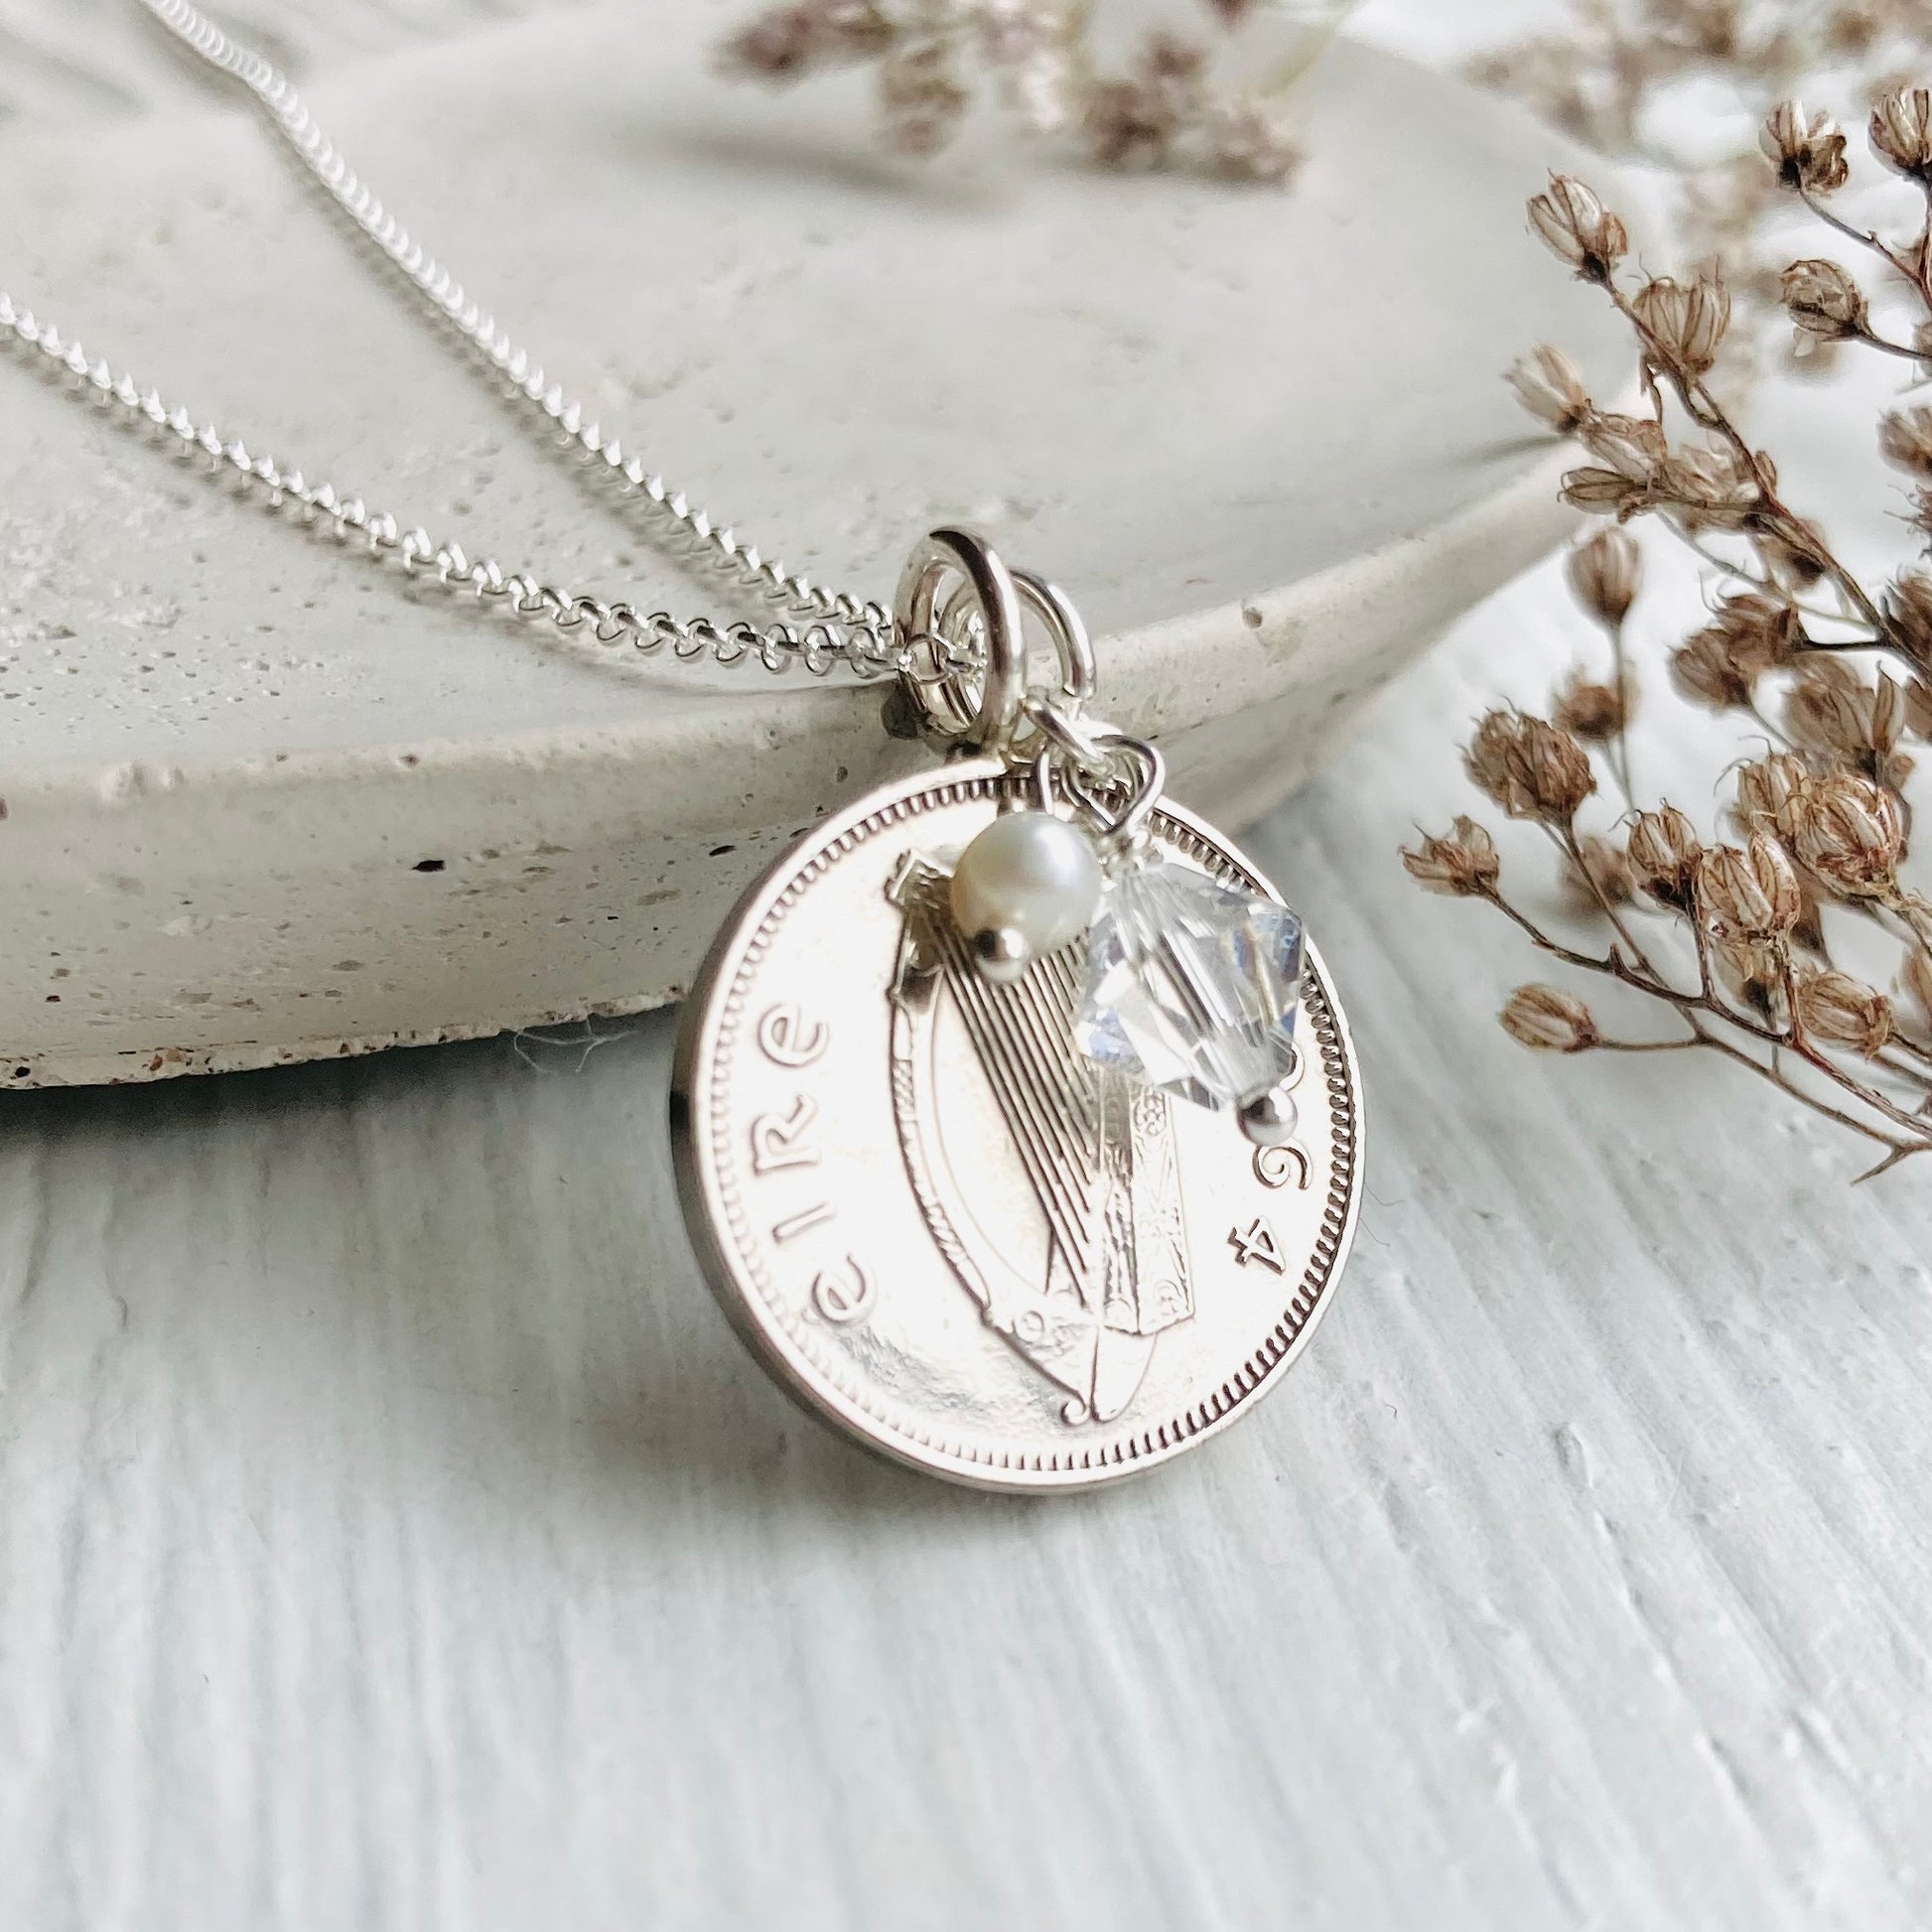 Irish silver coin necklace with April birthstone, by Prenoa, Stamford, UK